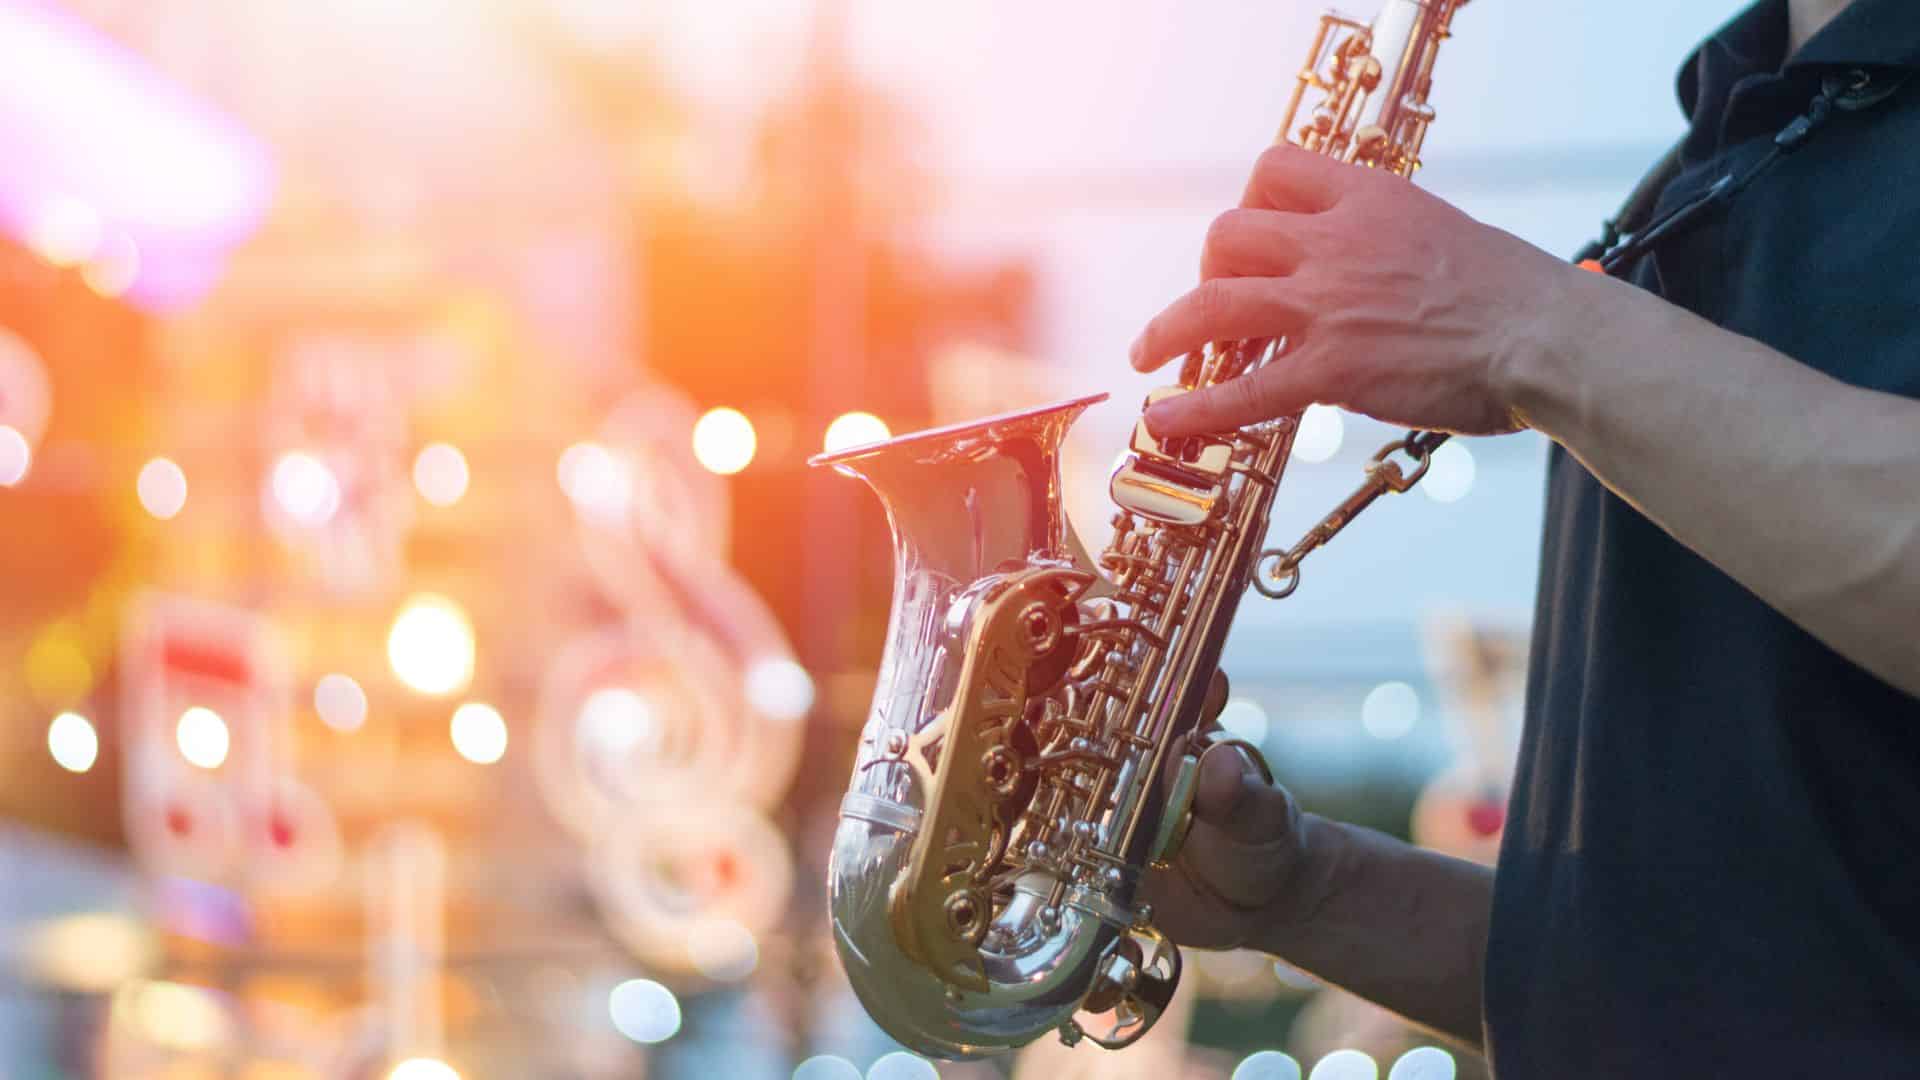 A saxophone player at an outdoor music festival with bright lights